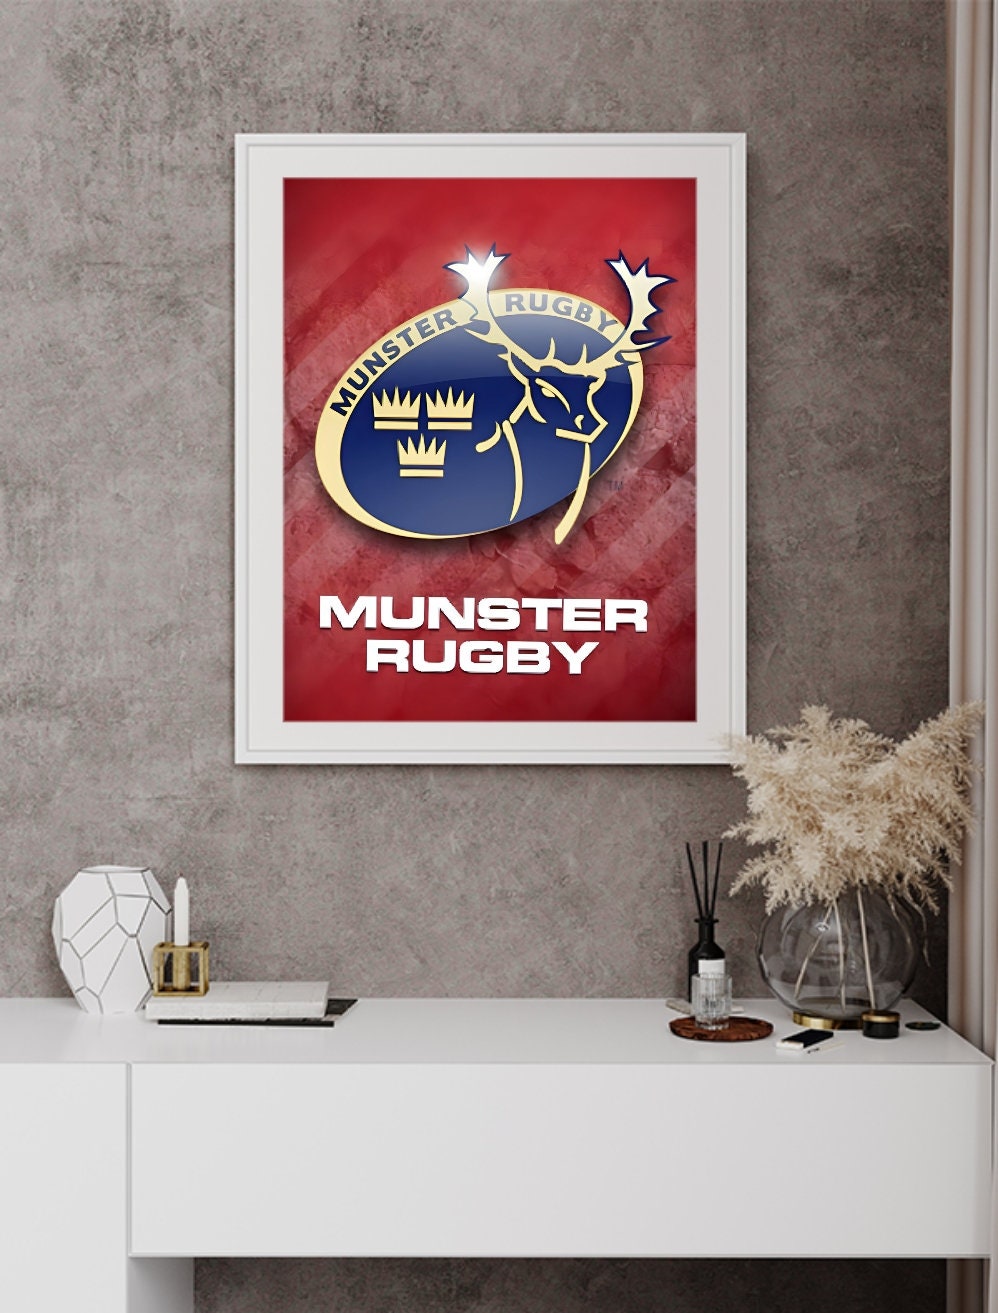 Munster Rugby Sweden escapeauthority